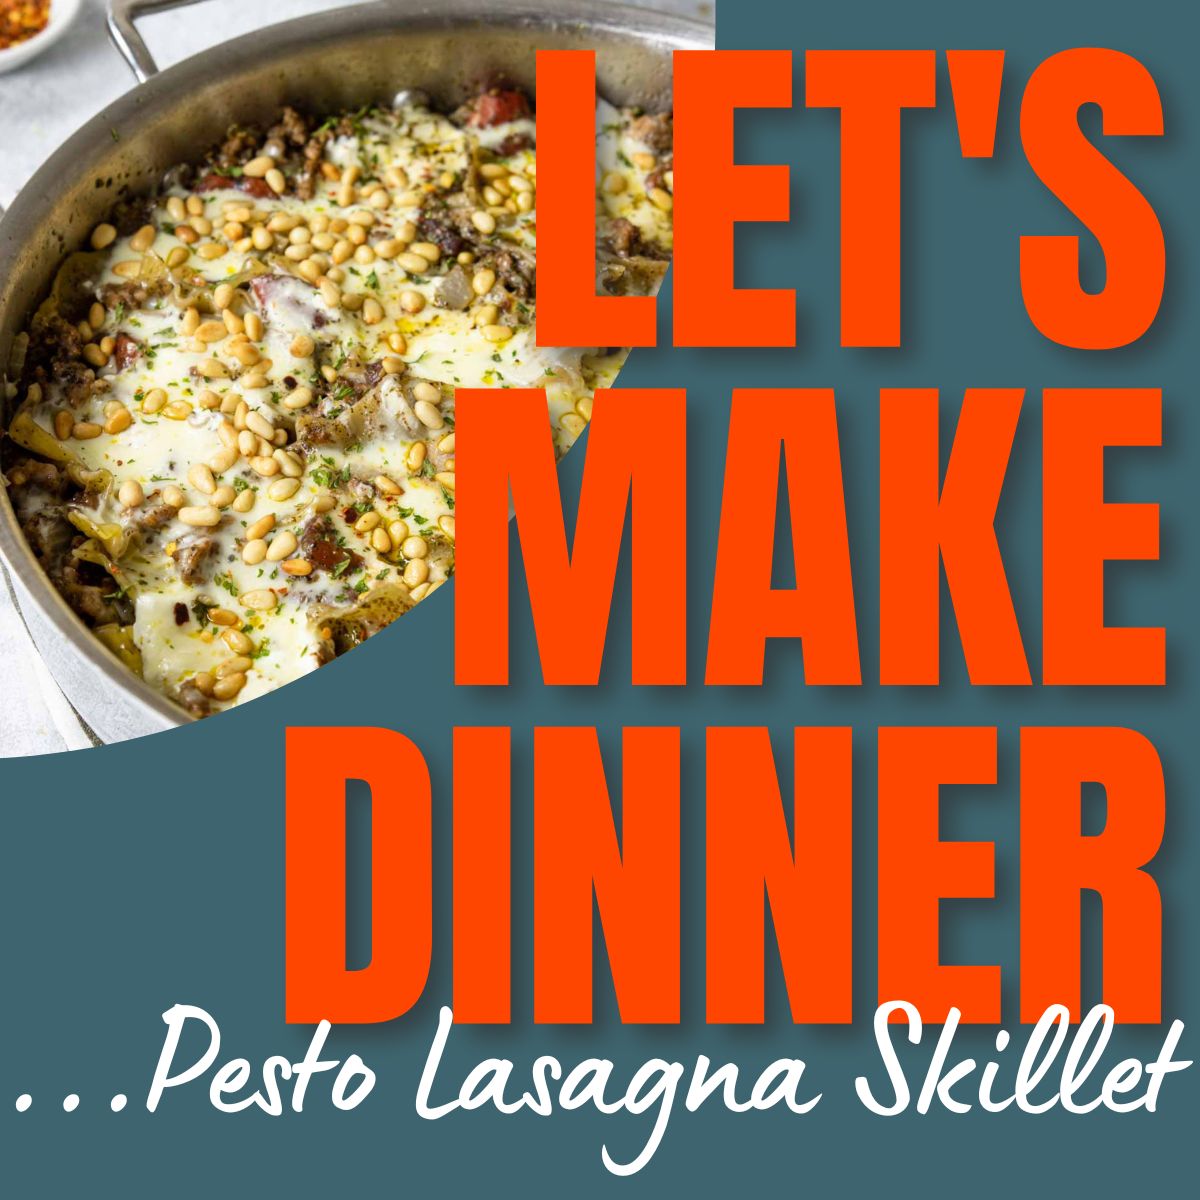 Let's Make Dinner text with a photo of pesto skillet lasagna